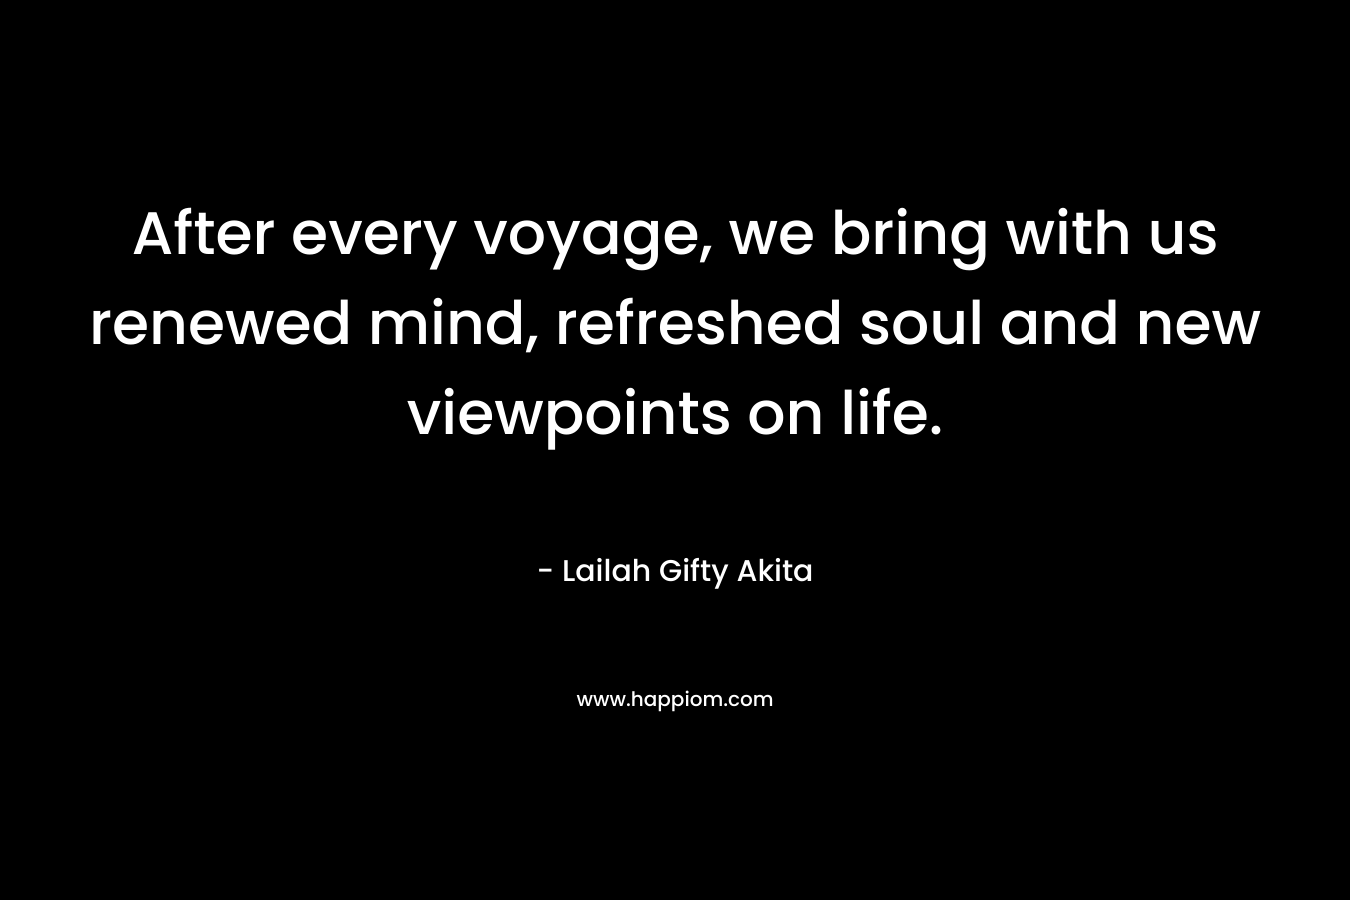 After every voyage, we bring with us renewed mind, refreshed soul and new viewpoints on life. – Lailah Gifty Akita